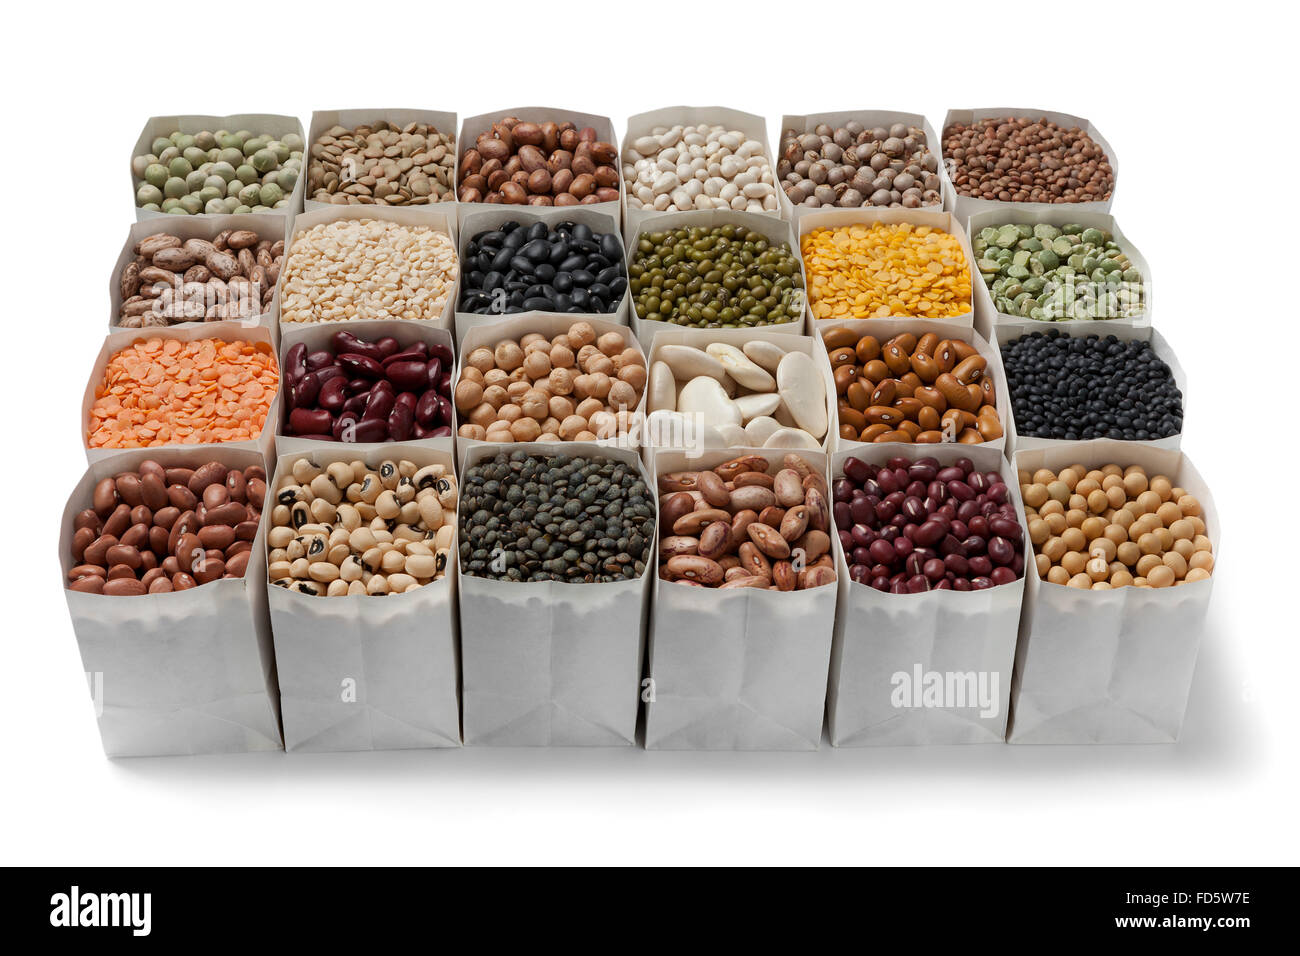 Variety of dried beans and lentils in bags on white background Stock Photo